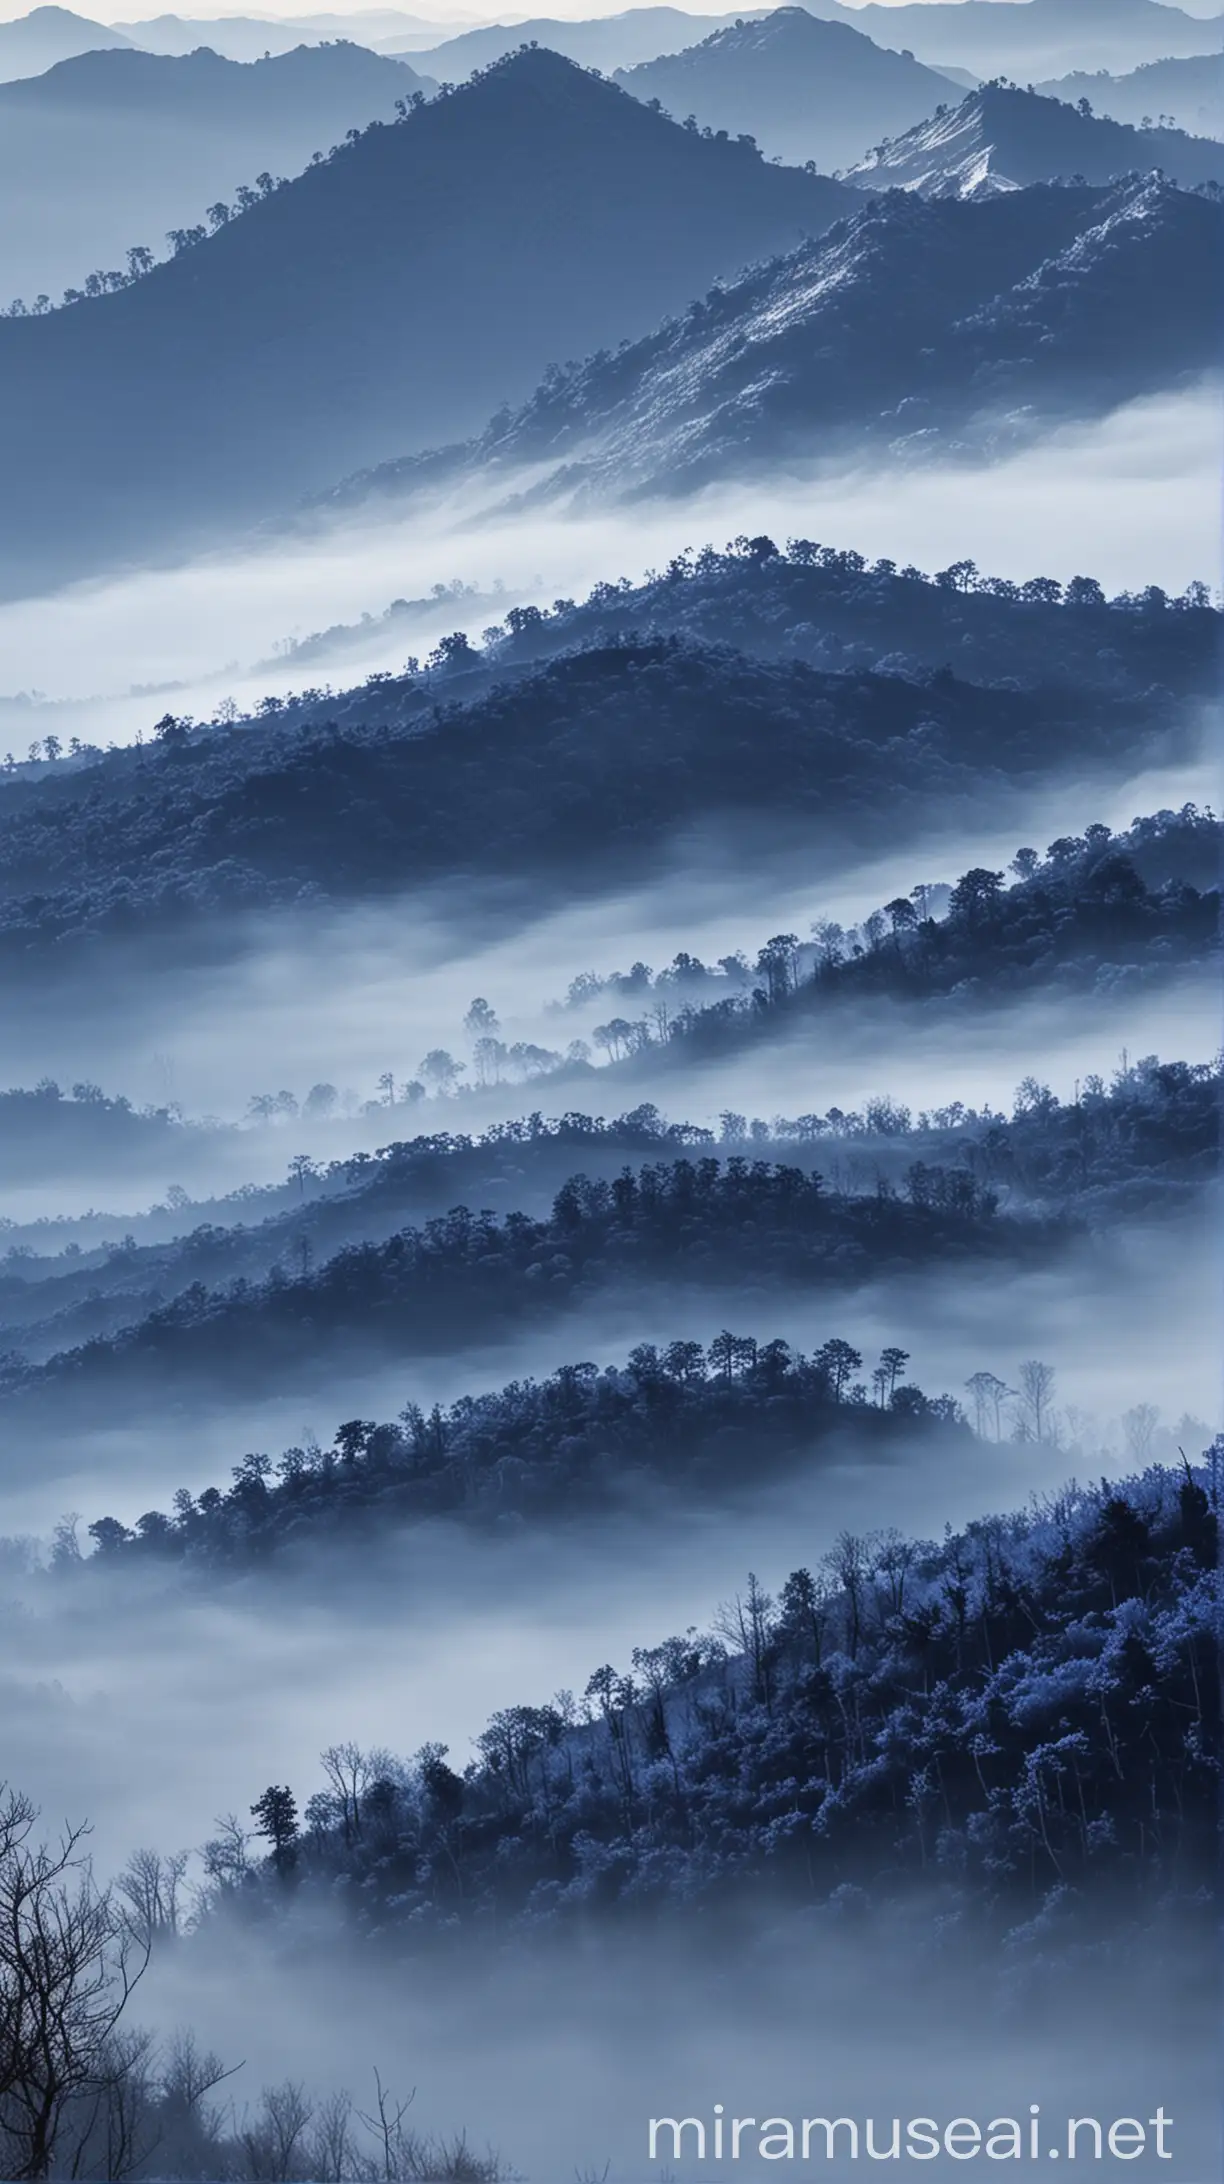 Mysterious Indigo Mountains Enveloped in Cold Mist